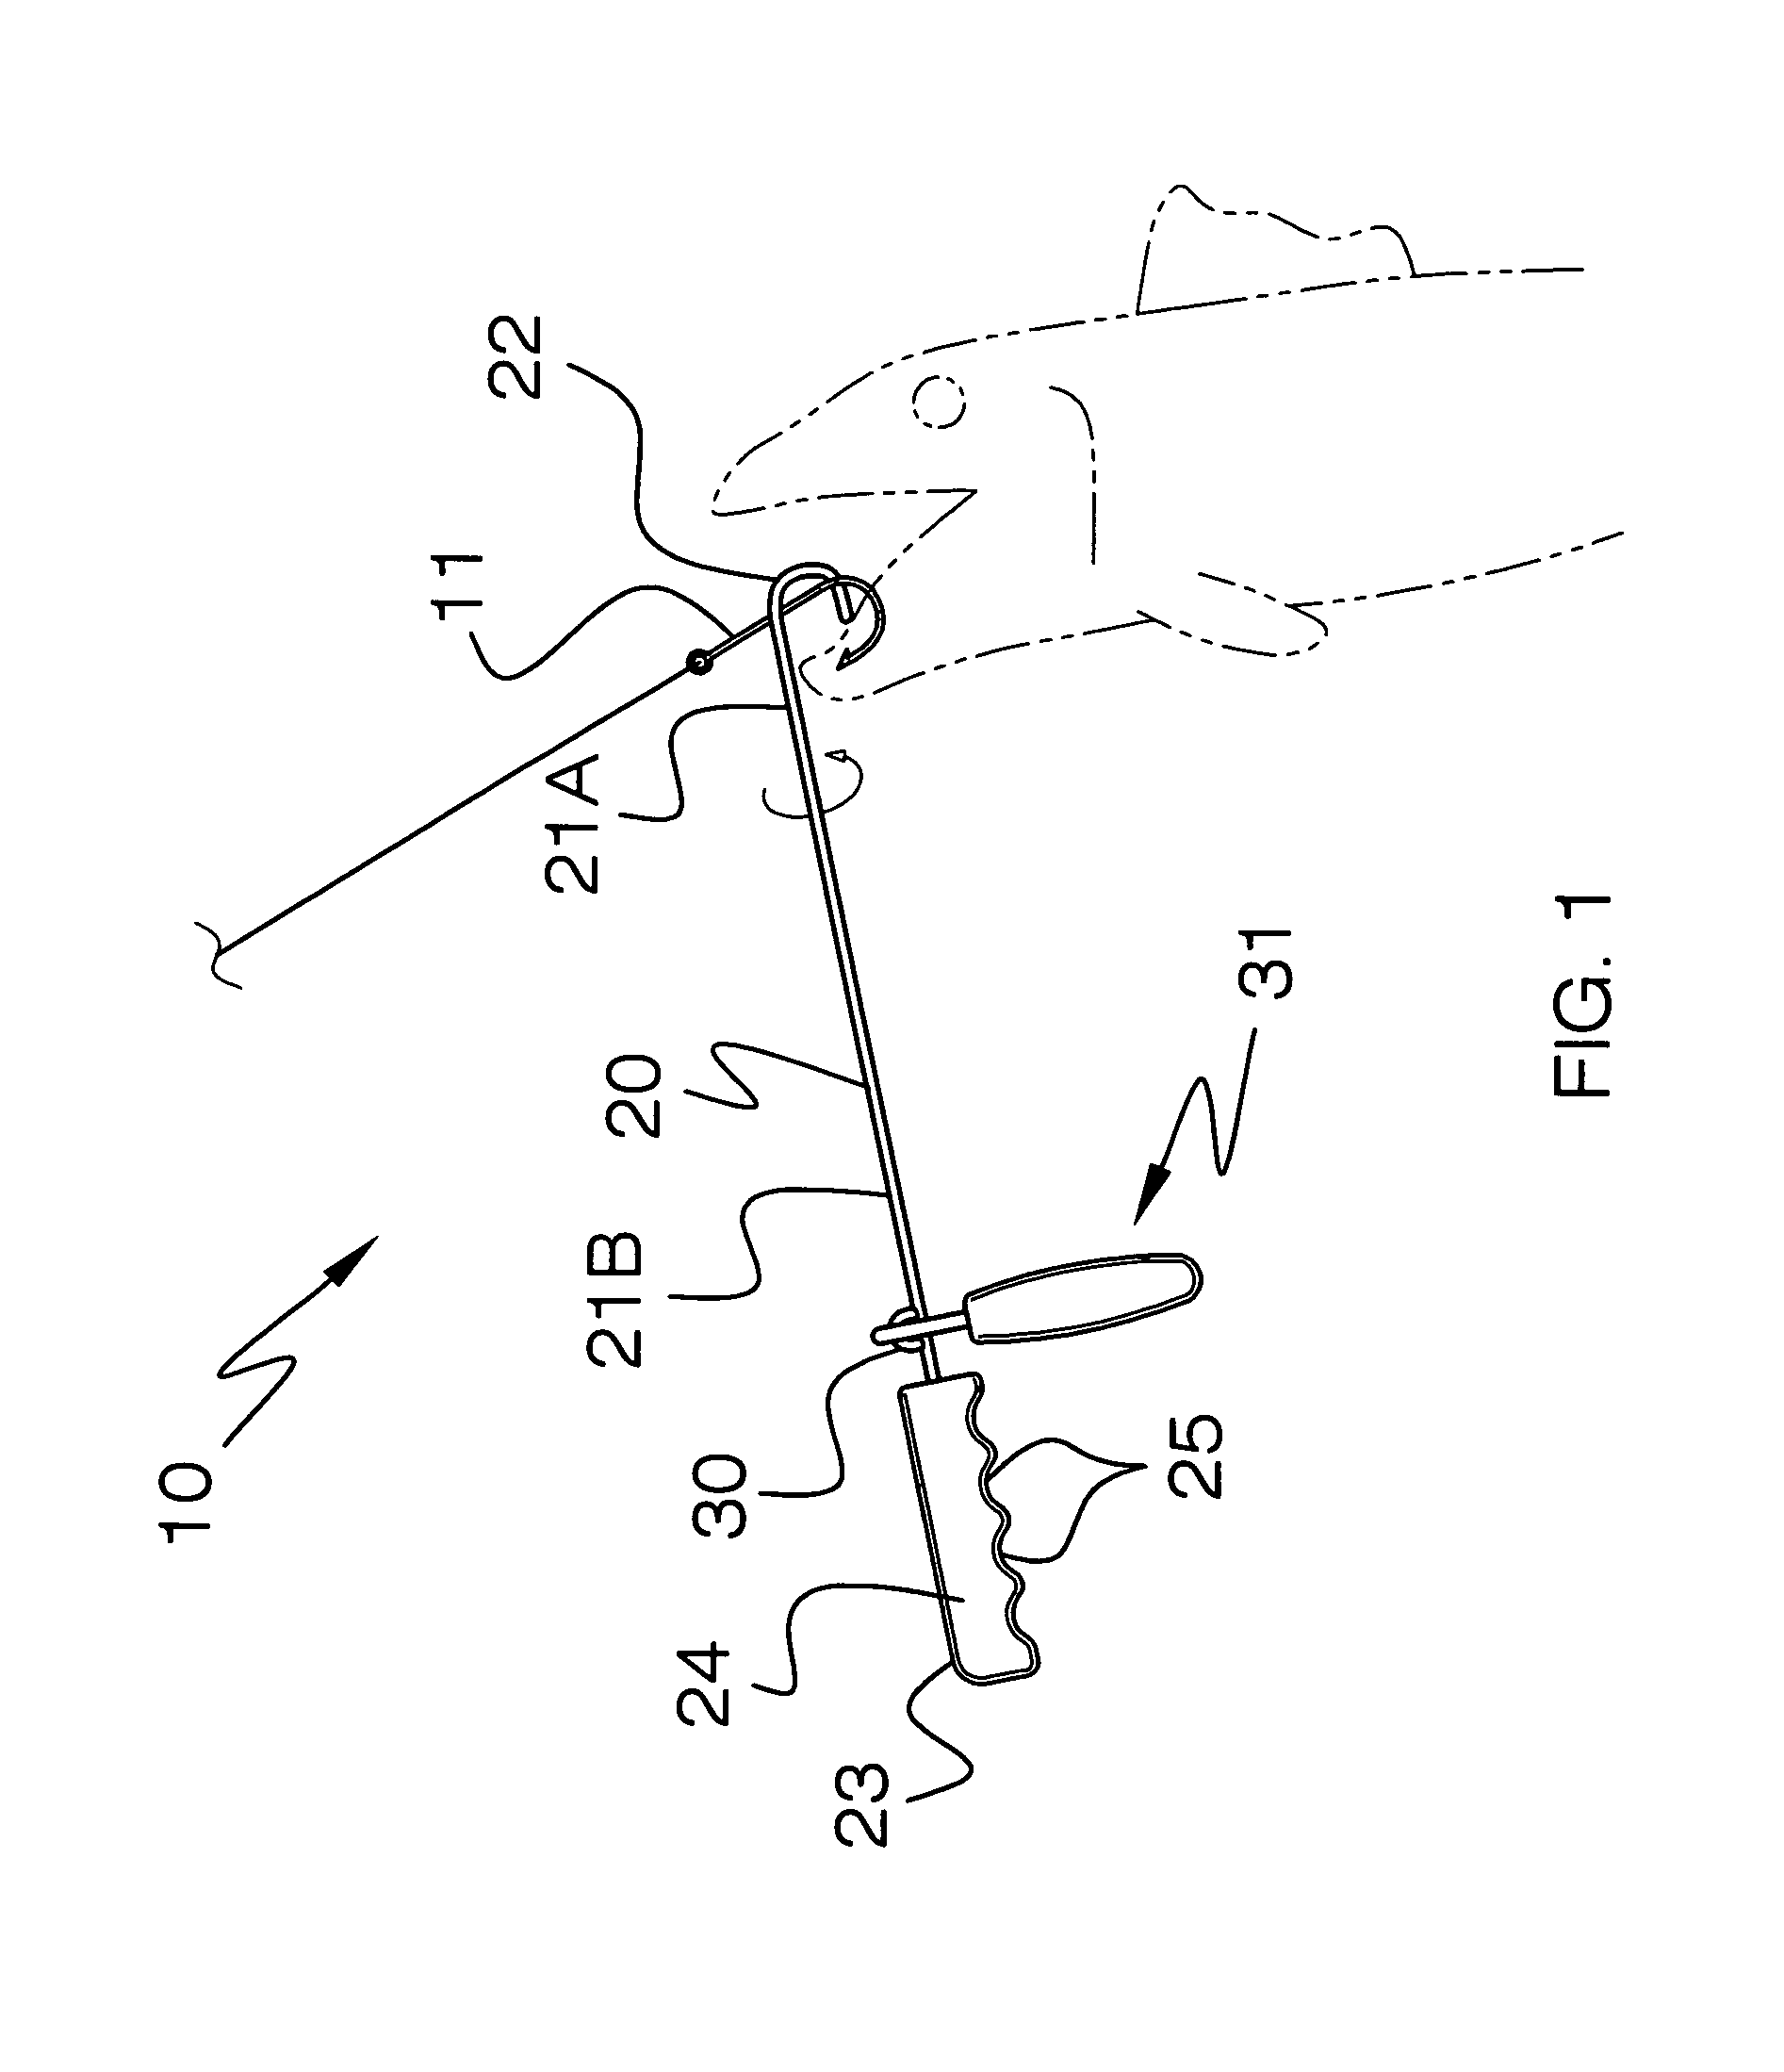 Two-handed fish hook removal apparatus